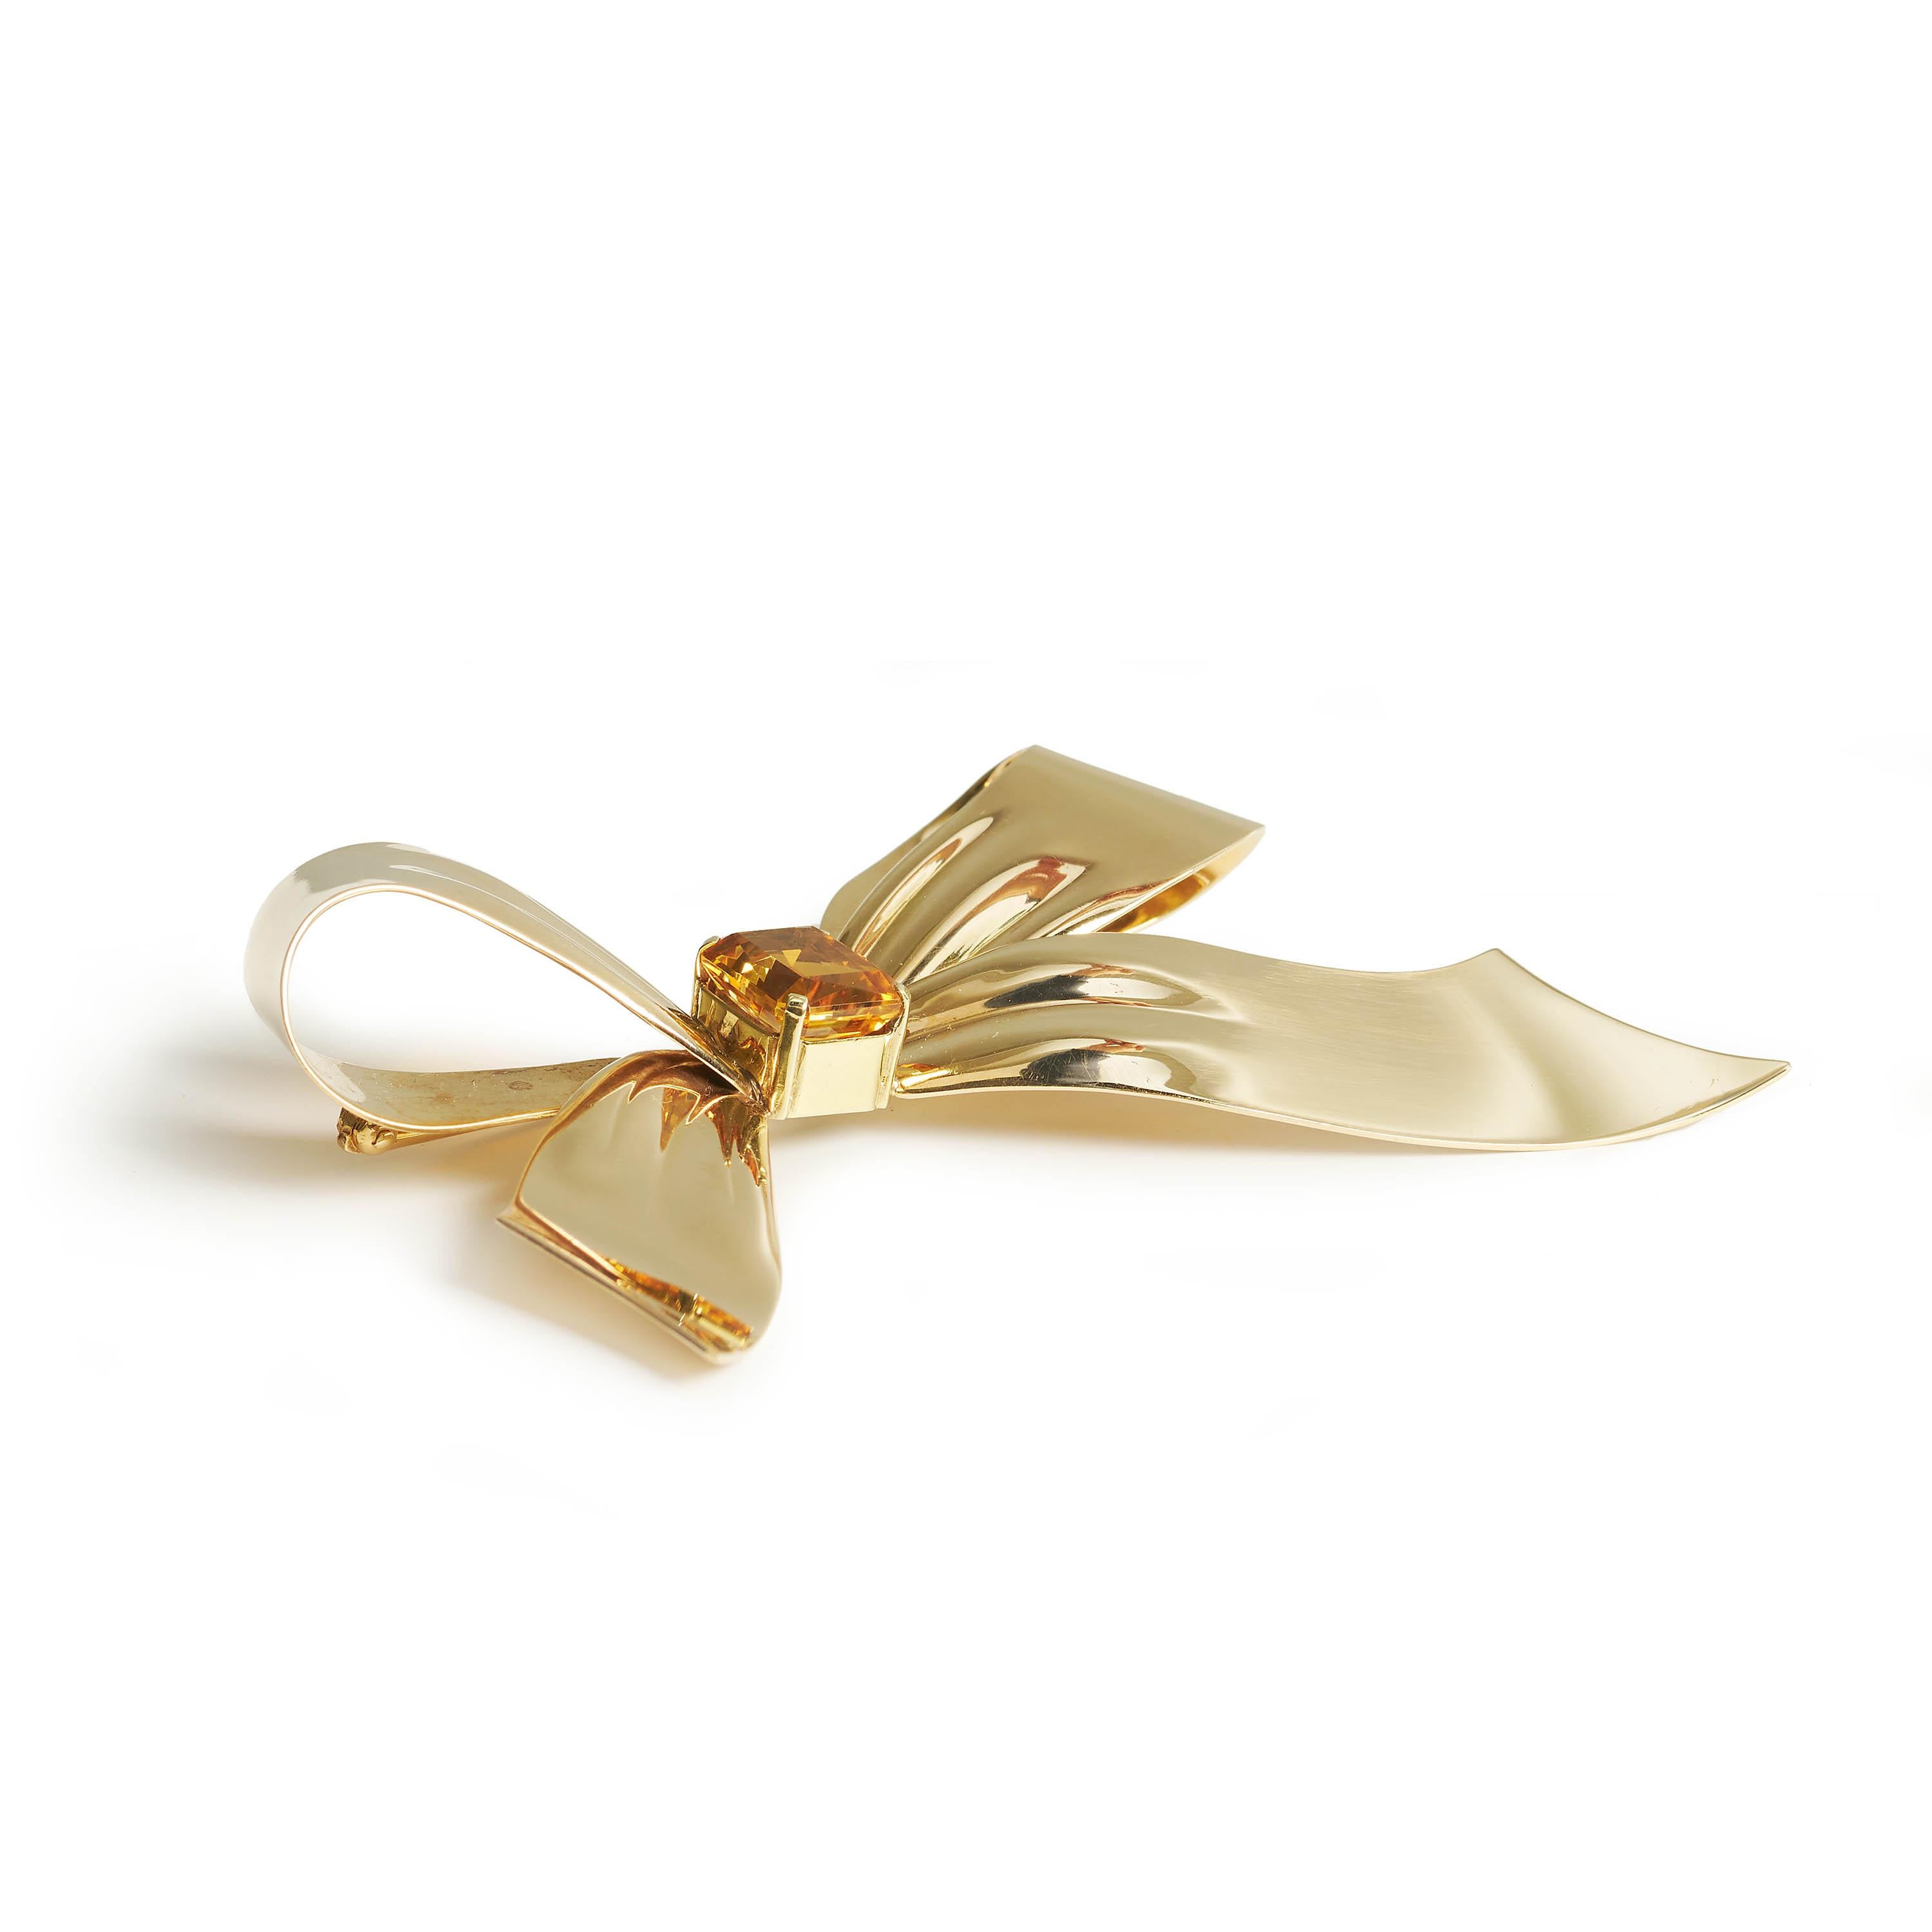 A vintage Tiffany & Co., citrine and gold bow brooch, with a scissor-cut citrine, in the place of the knot, in a four claw setting, mounted in polished 14ct gold, forming the bow ribbon, signed Tiffany & Co. on the lower ribbon, with a pin and